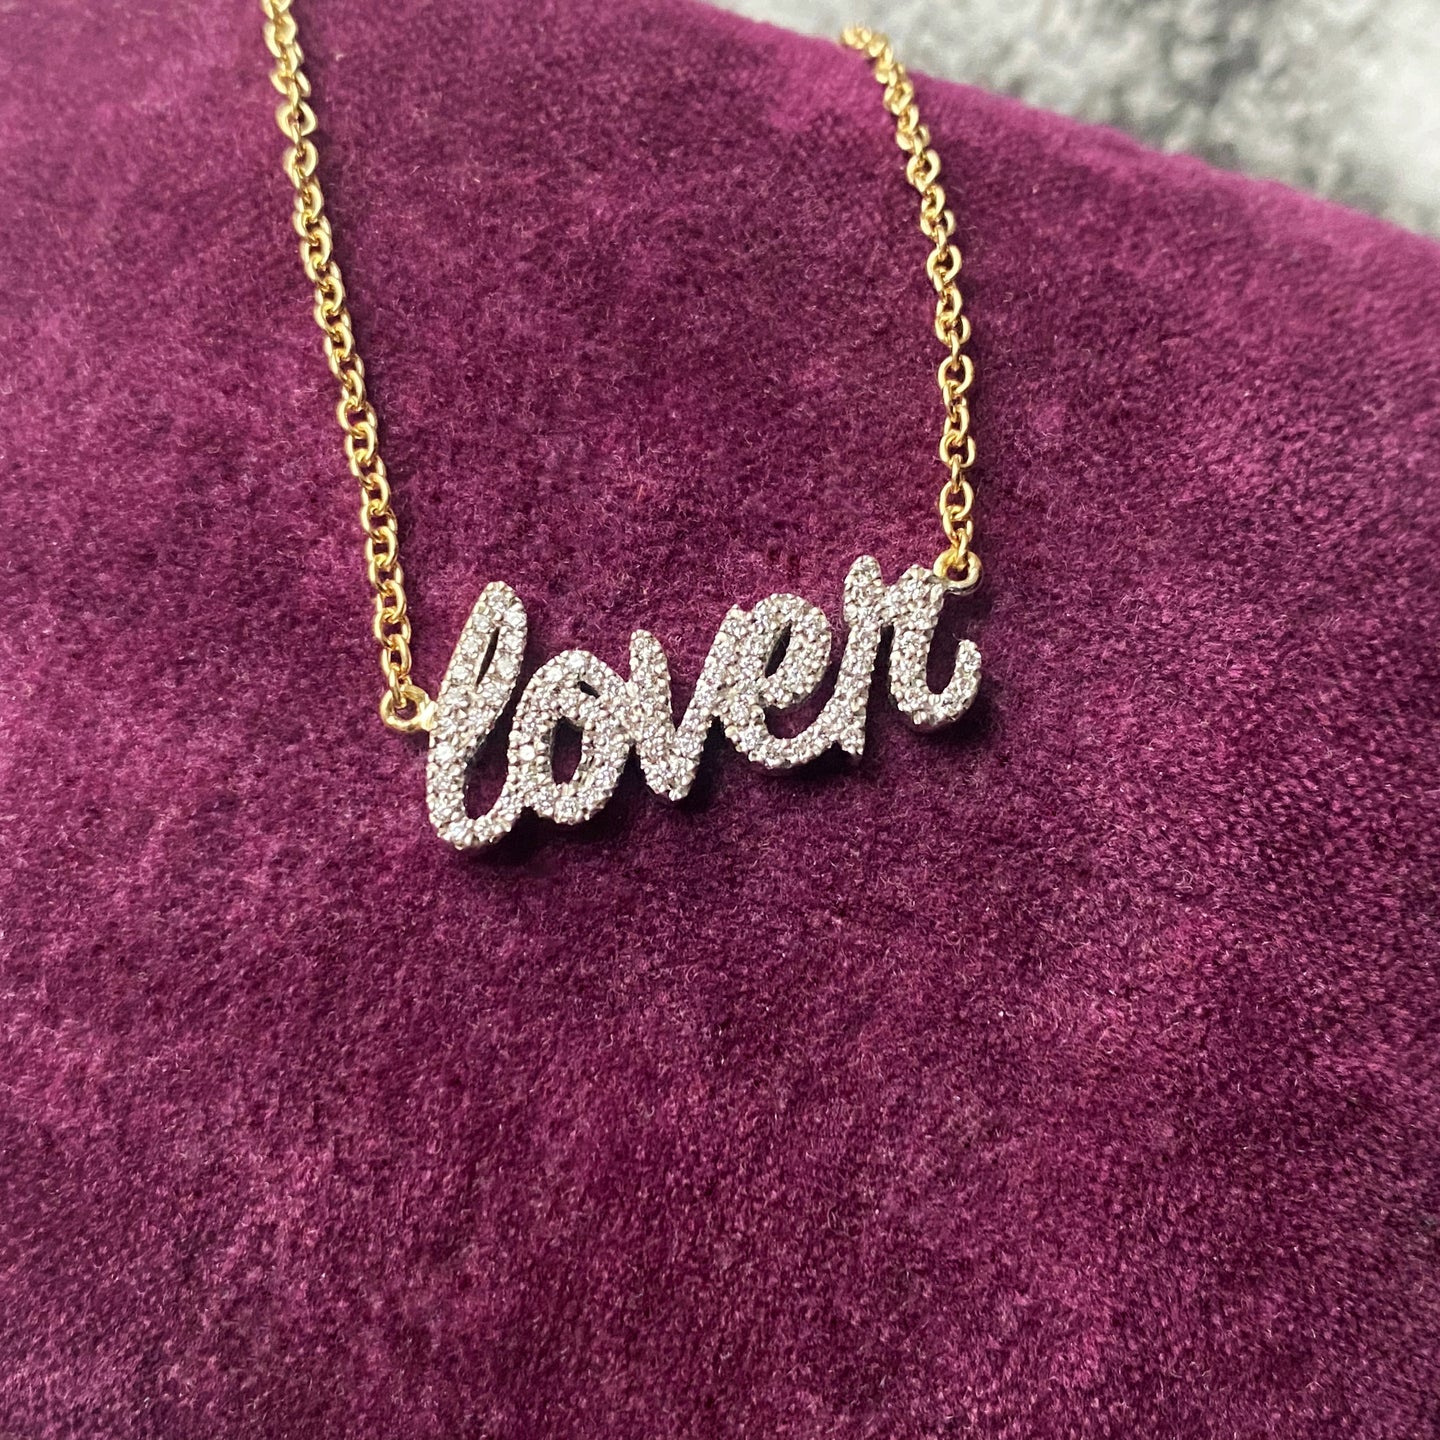 lover necklace